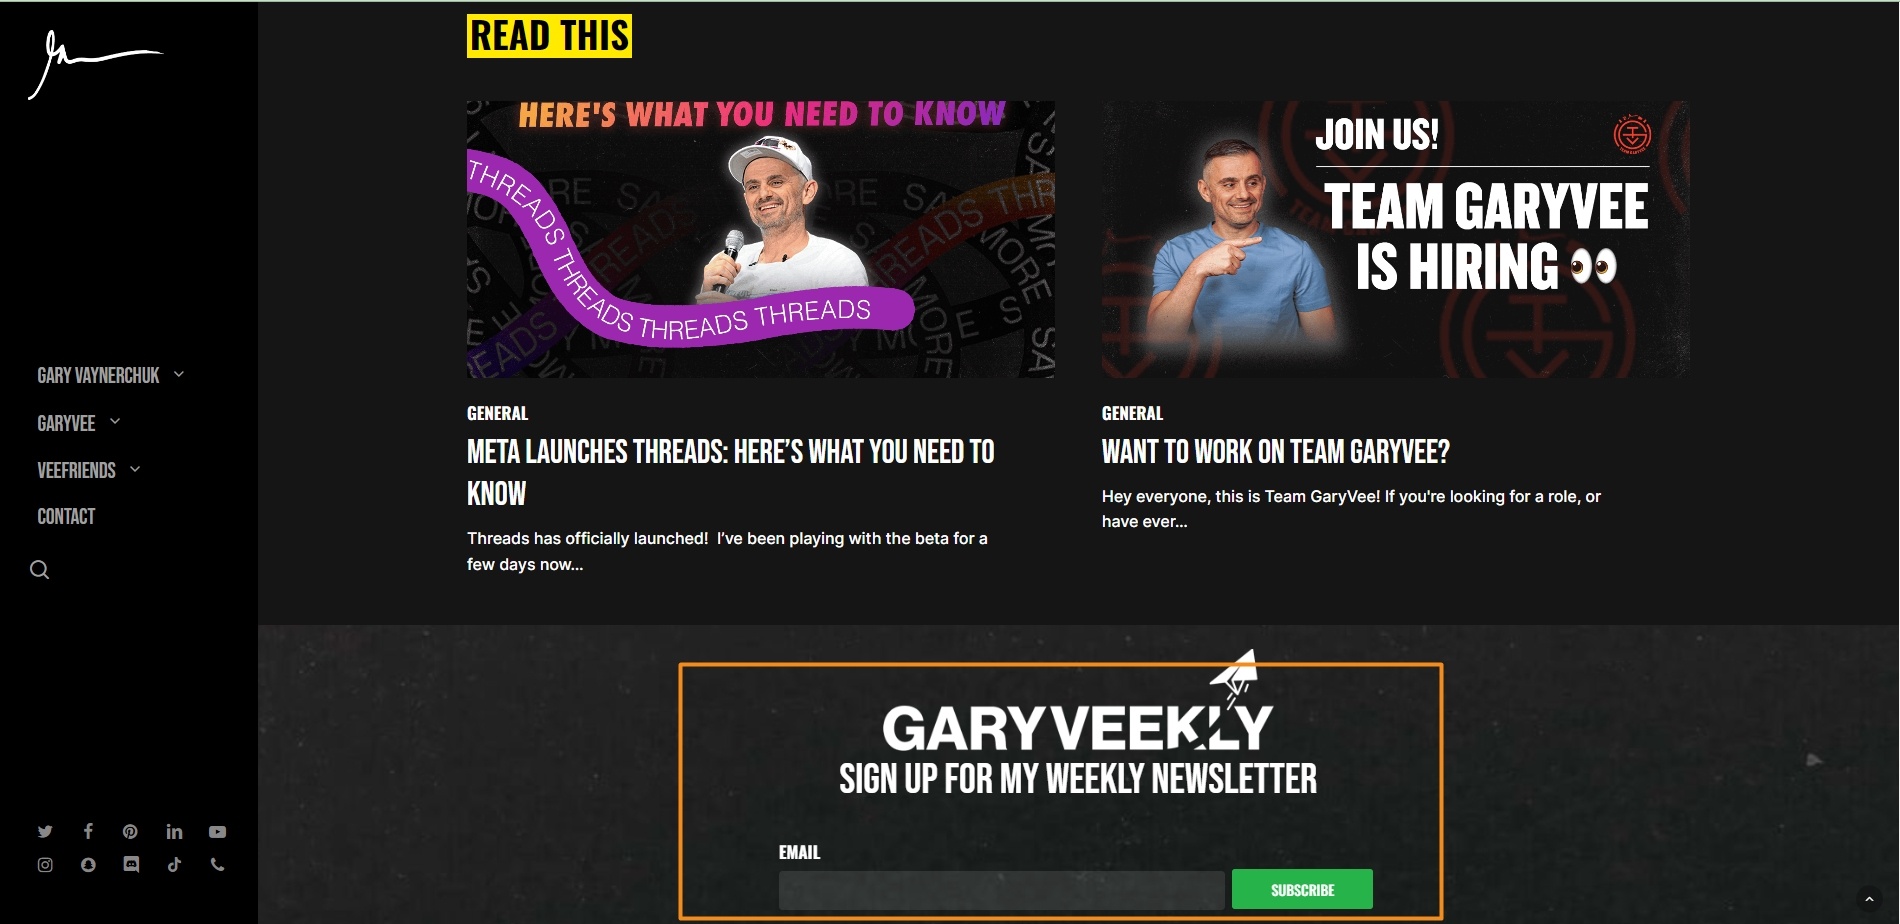 Gary Vee offers newsletter sign up for his users and clients